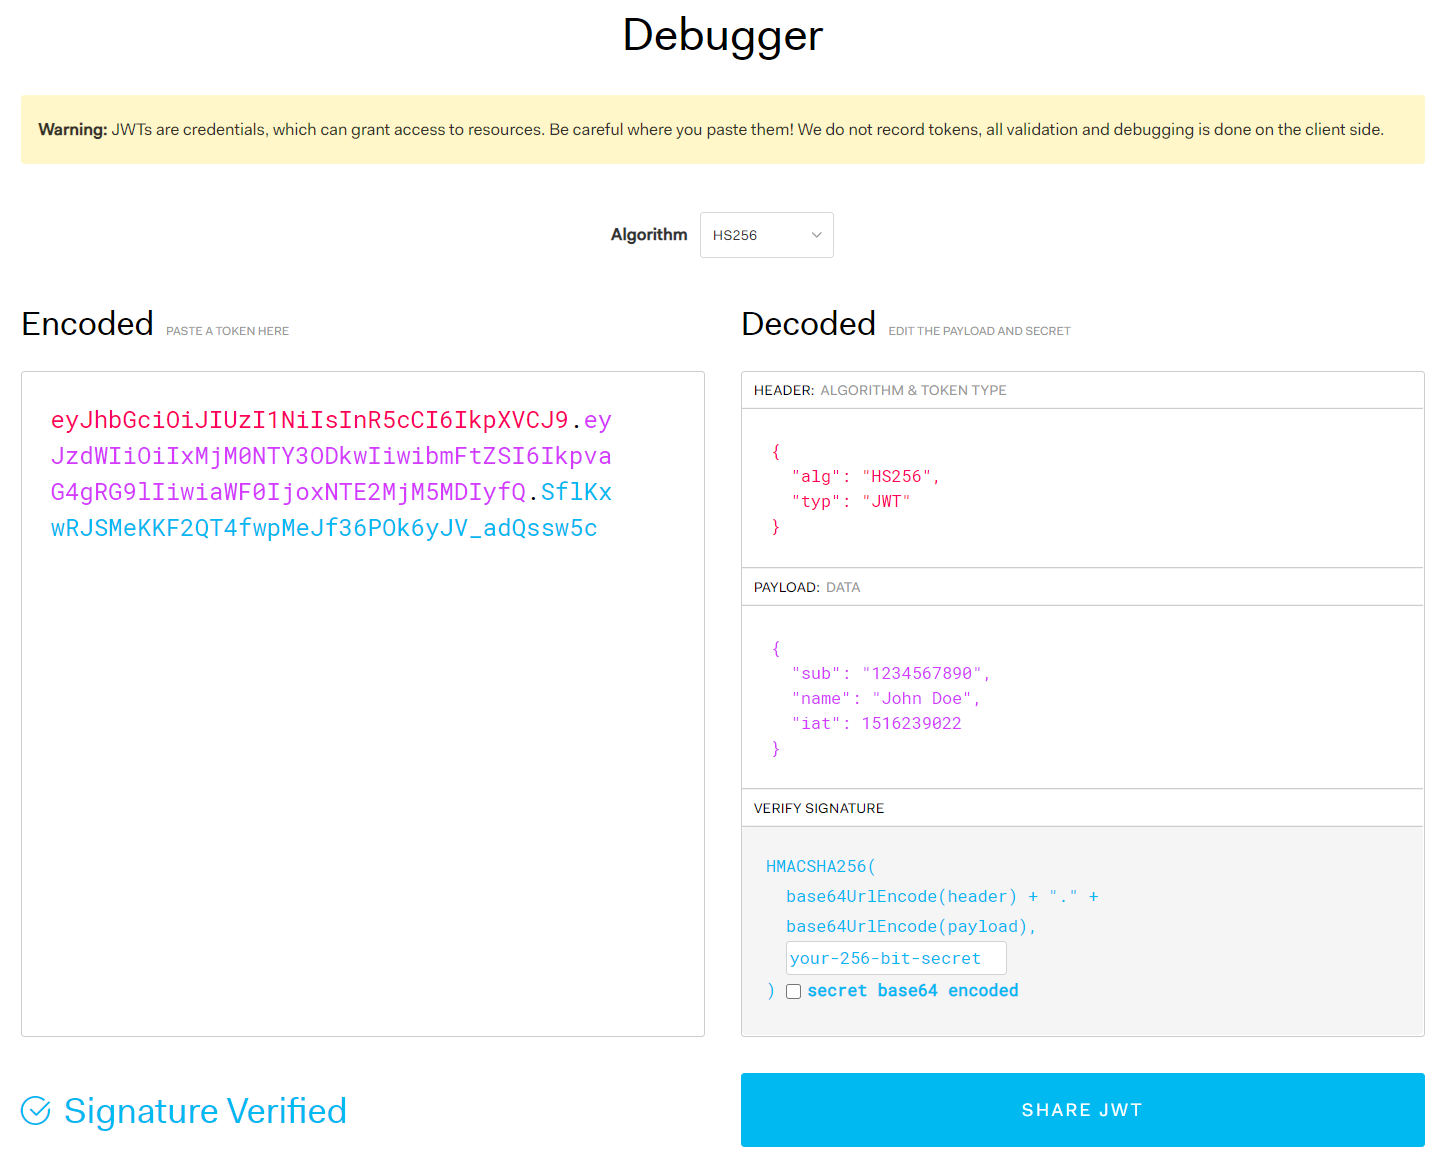 JWT debugger provided by jwt.io